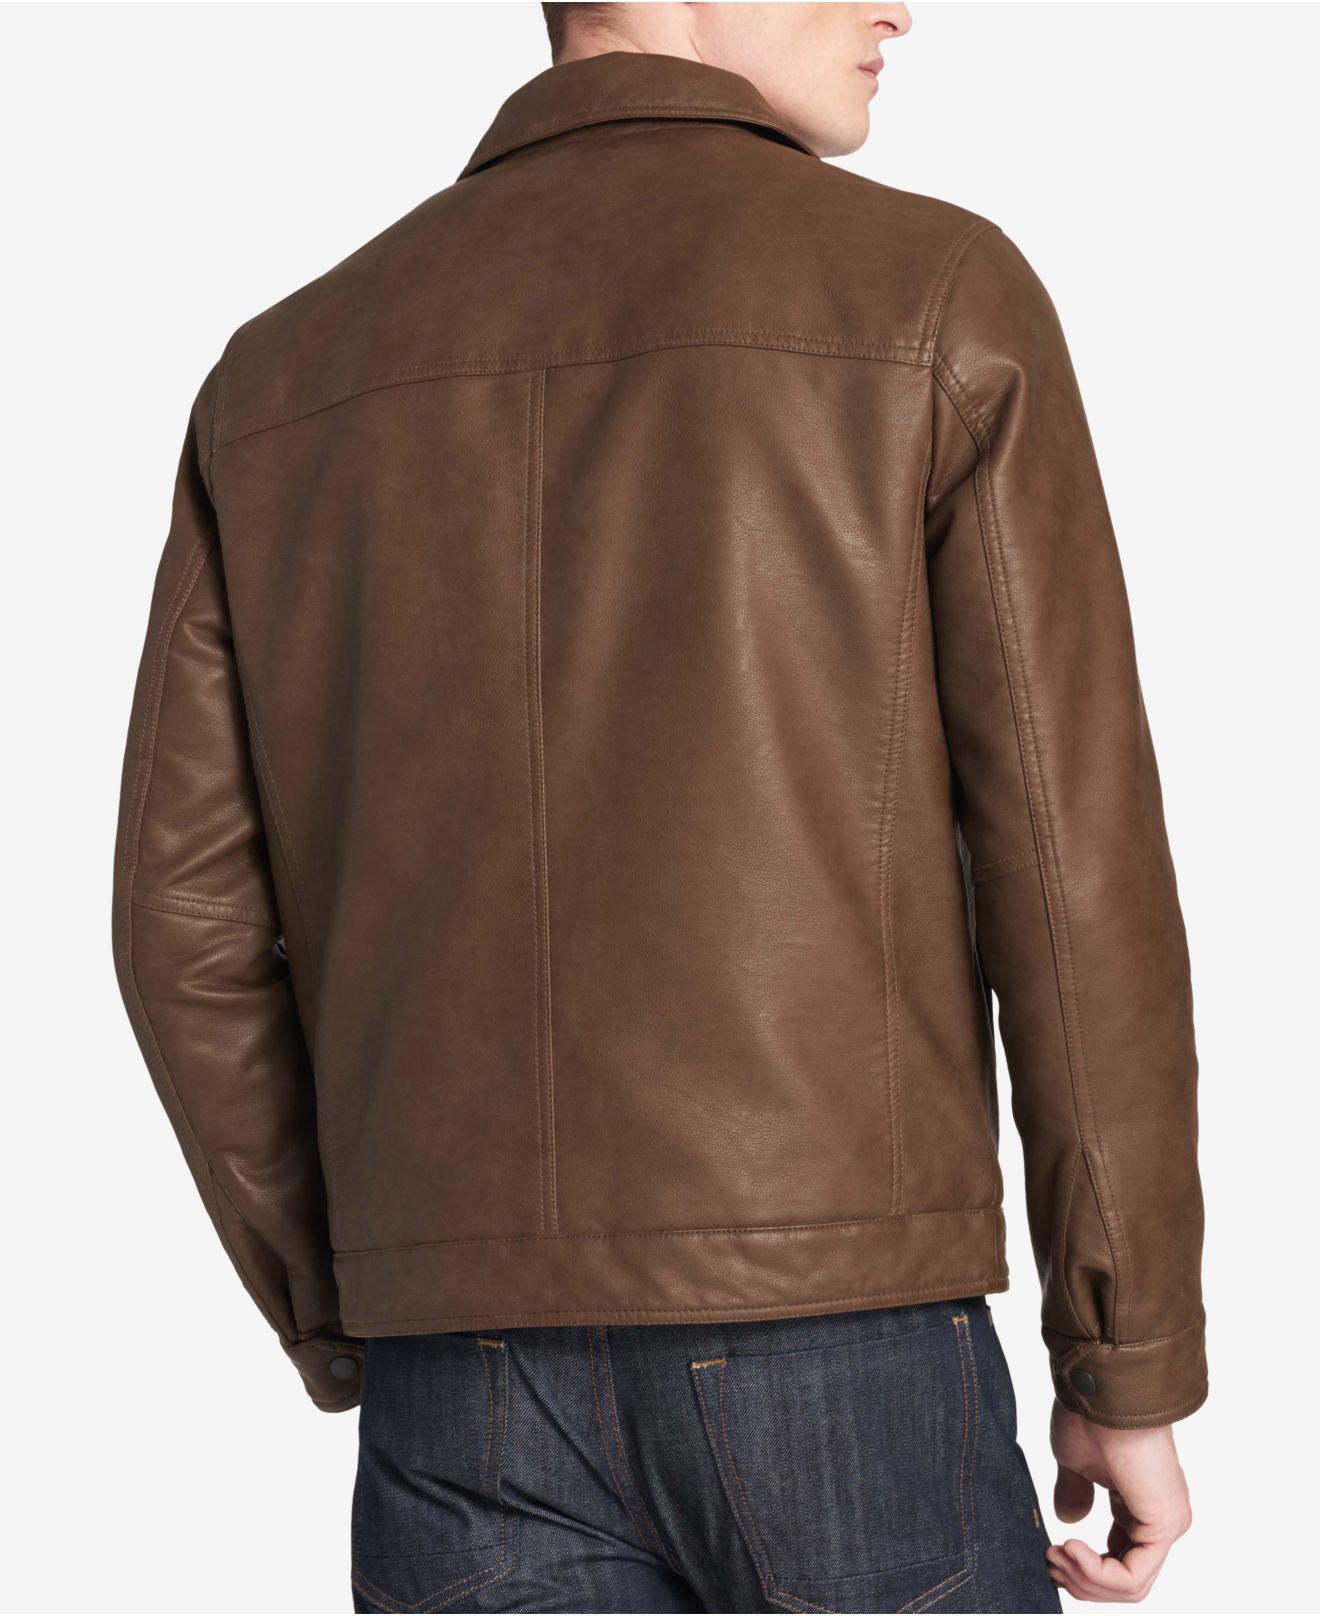 Tommy Hilfiger Faux Leather Bomber Jacket in Brown for Men - Lyst